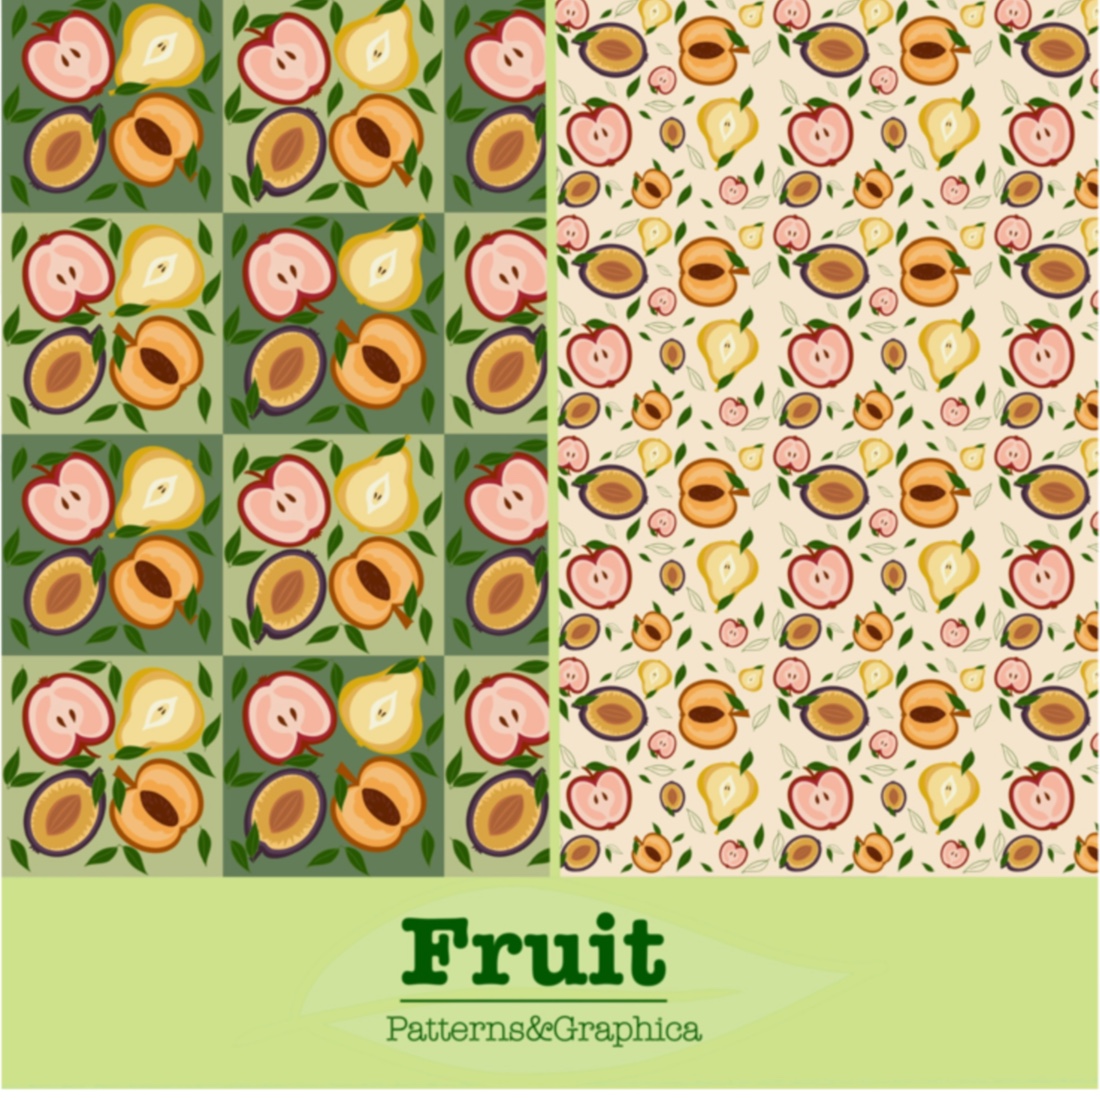 Fruit Patterns & Graphica preview image.